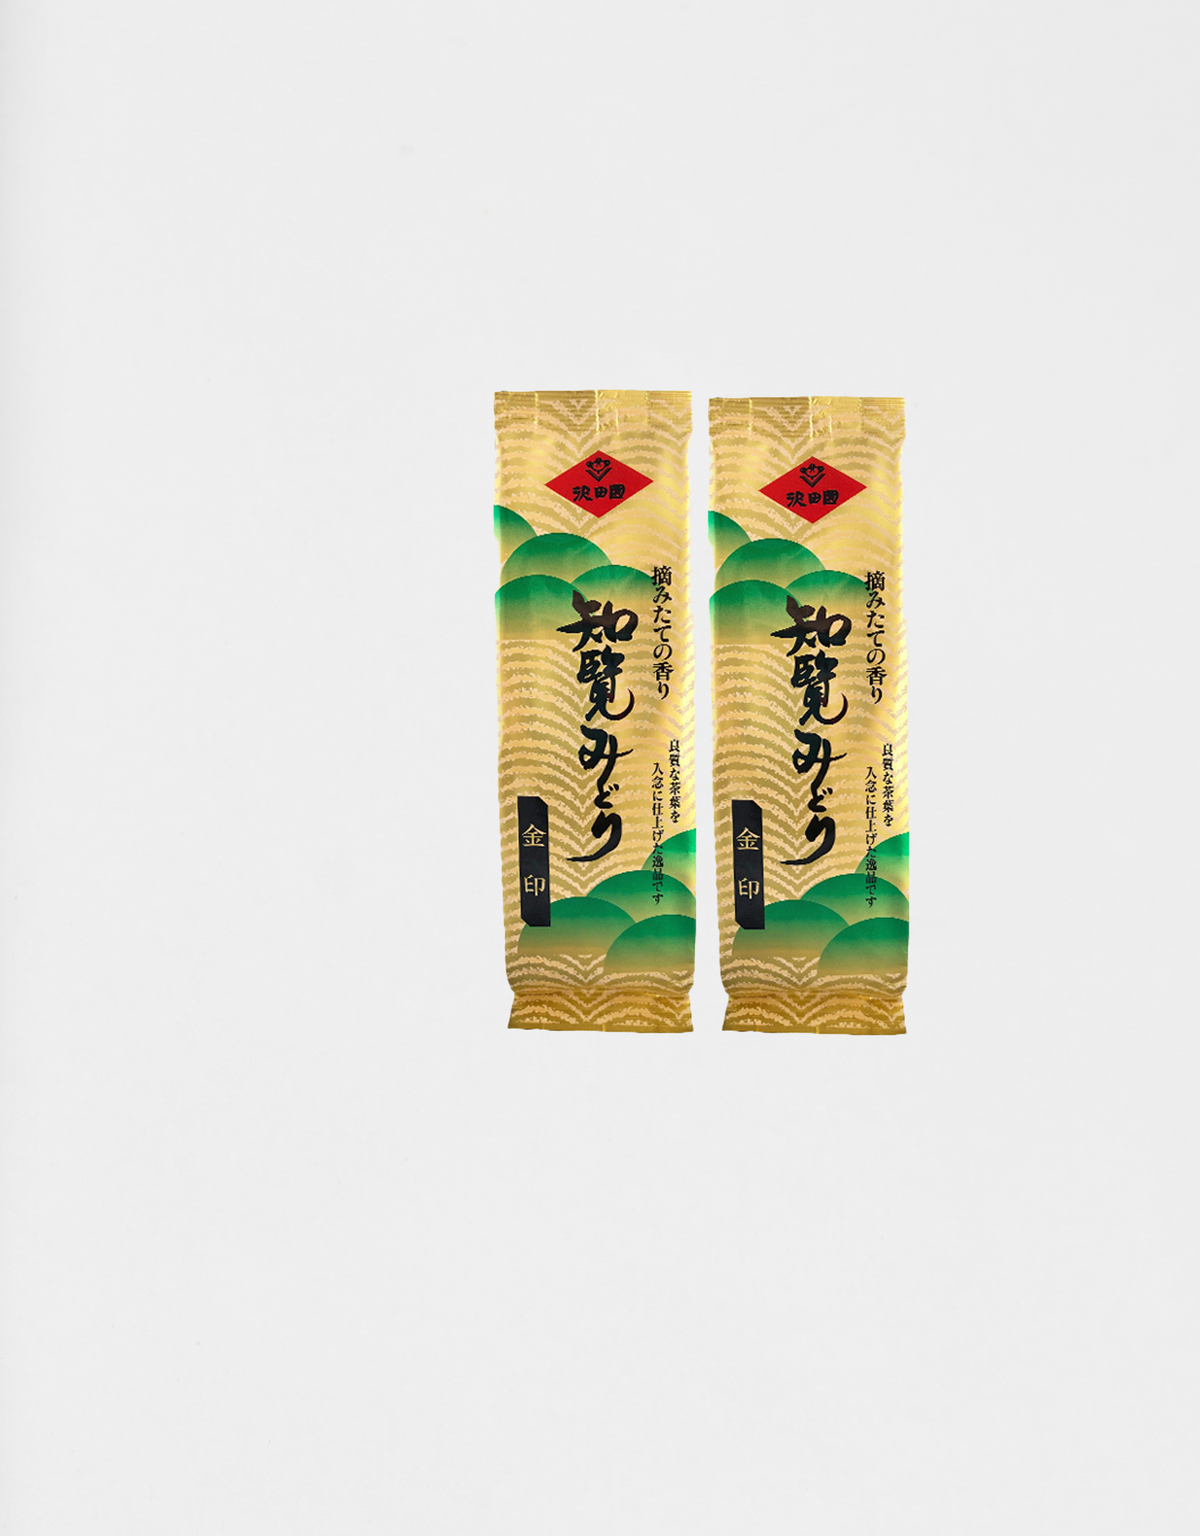 "The long-awaited gold seal! Here it is! ] 2 Chiran Midori gold stamps (100g x 2)